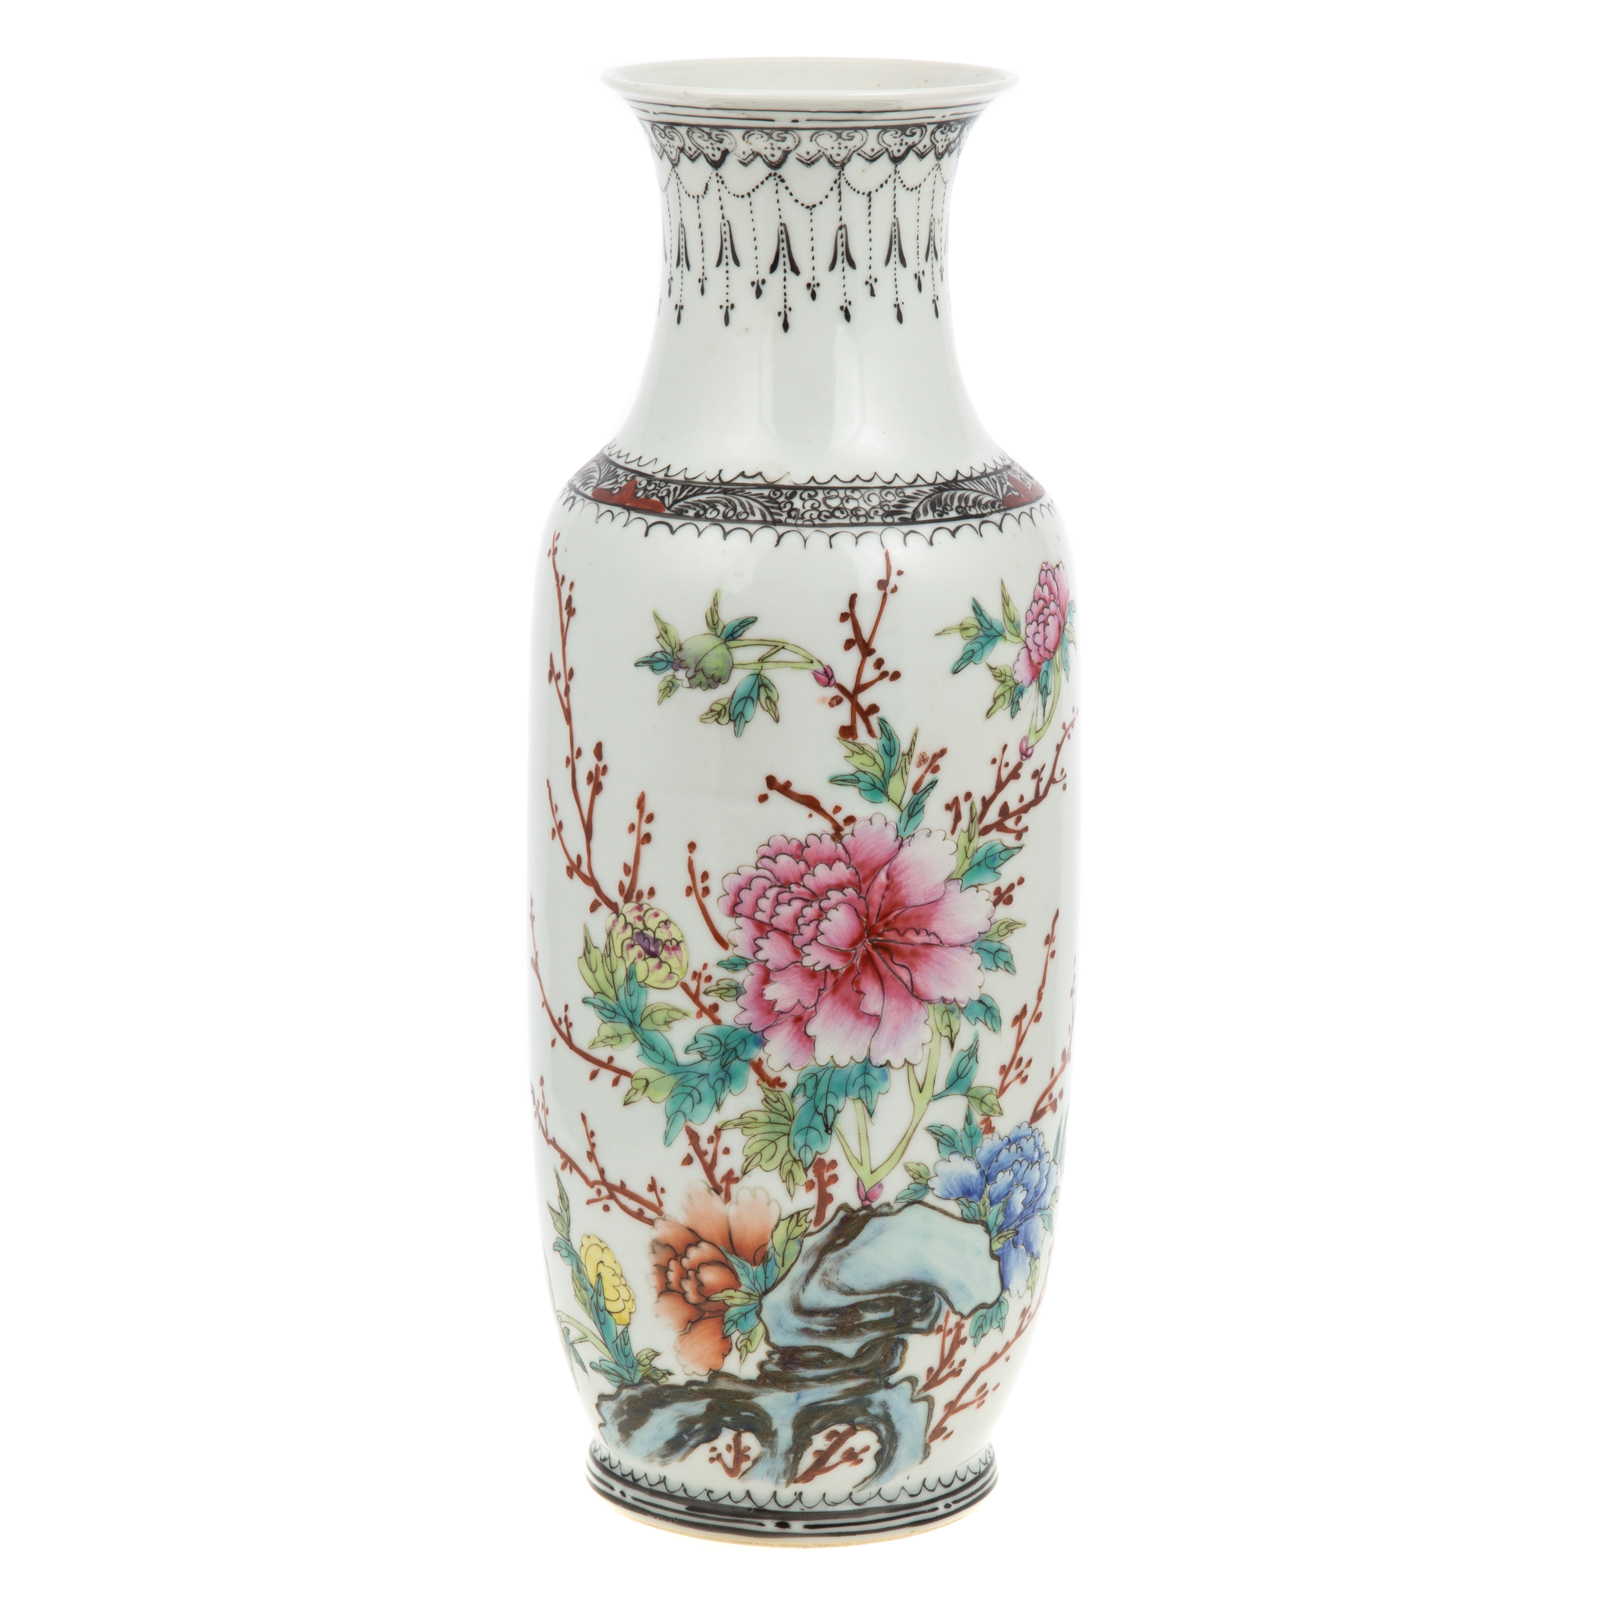 CHINESE PORCELAIN FAMILLE ROSE